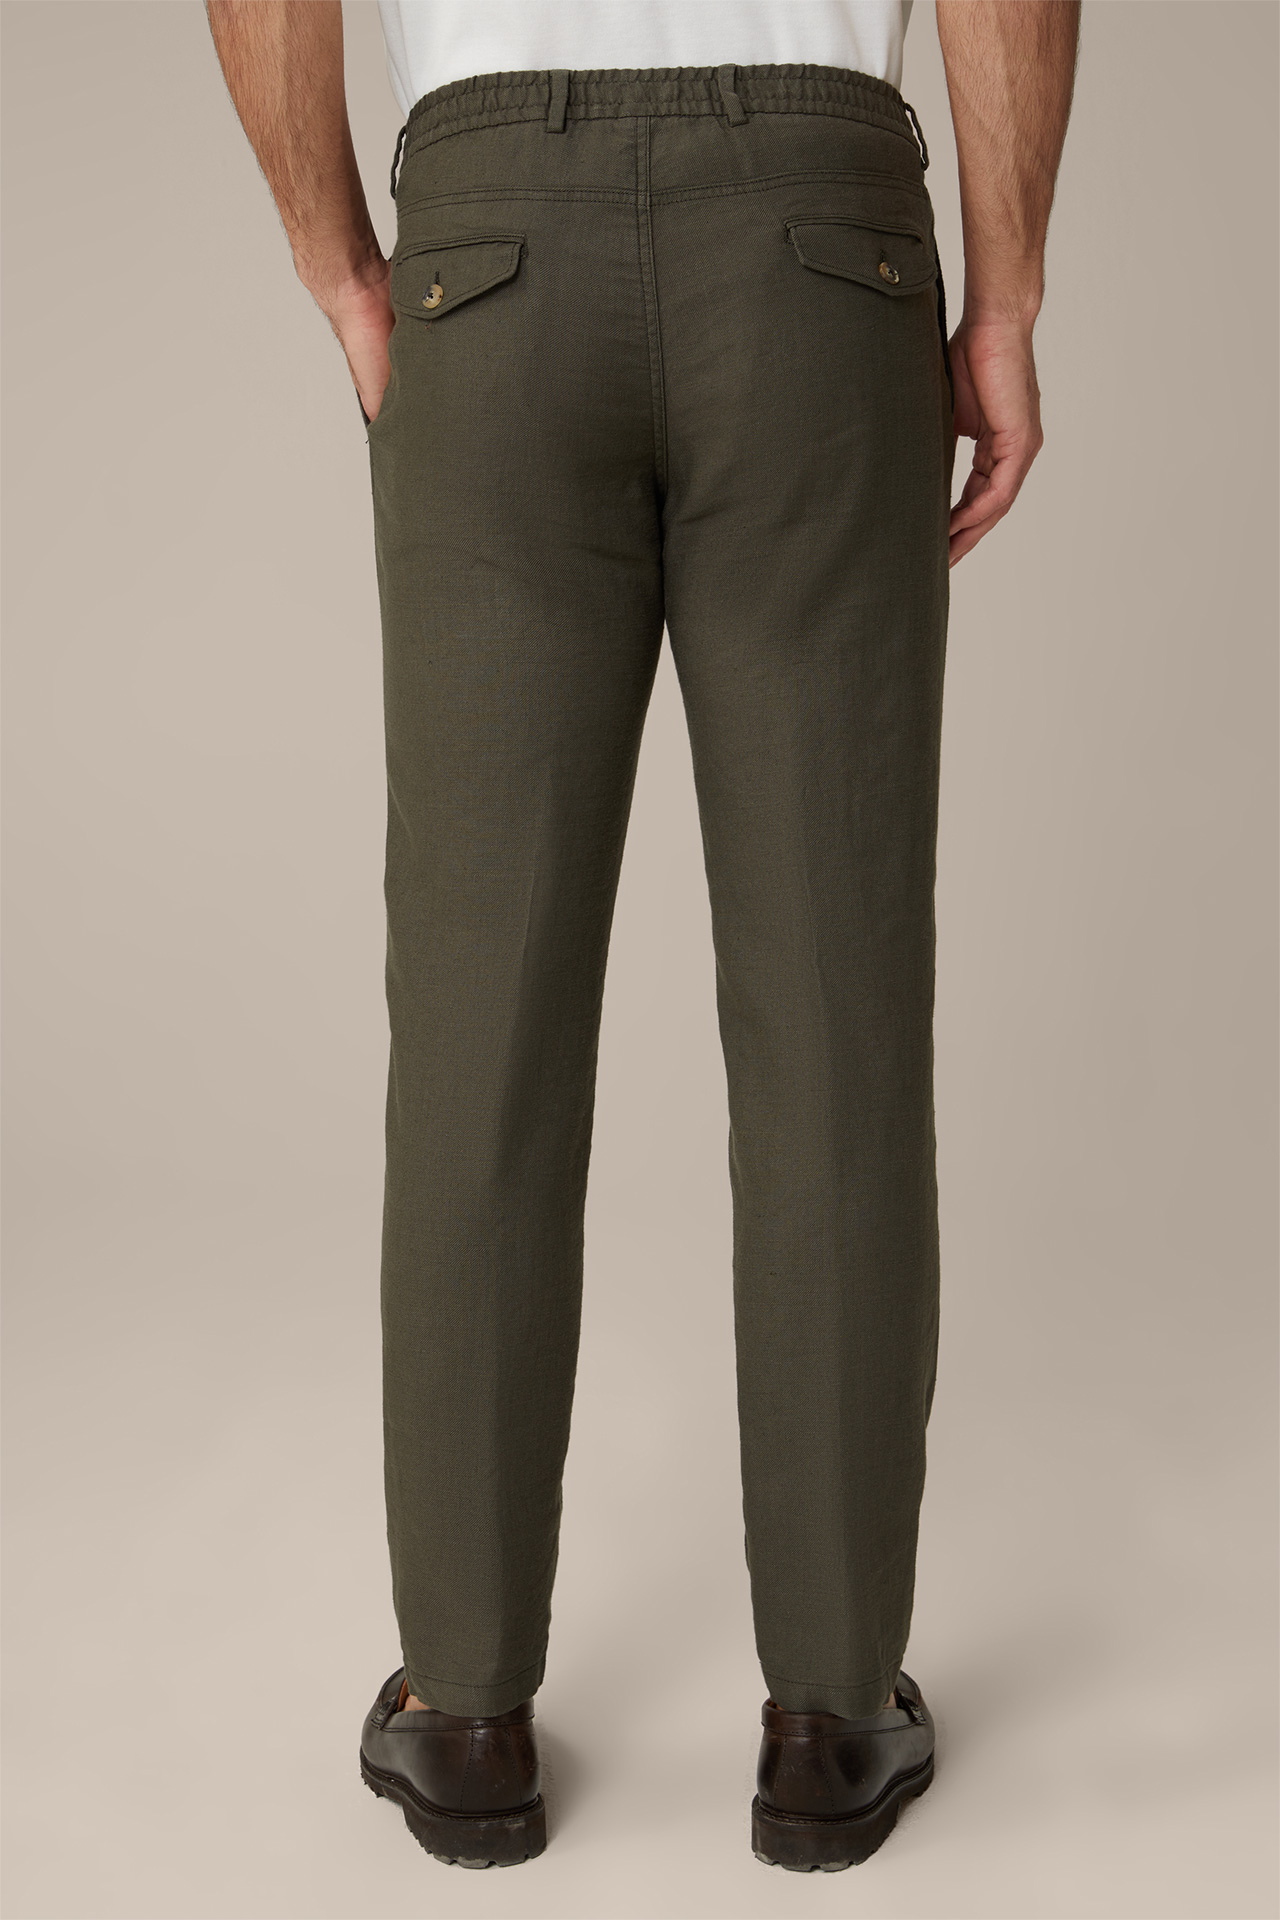 Floro Linen Mix Modular Trousers in Olive